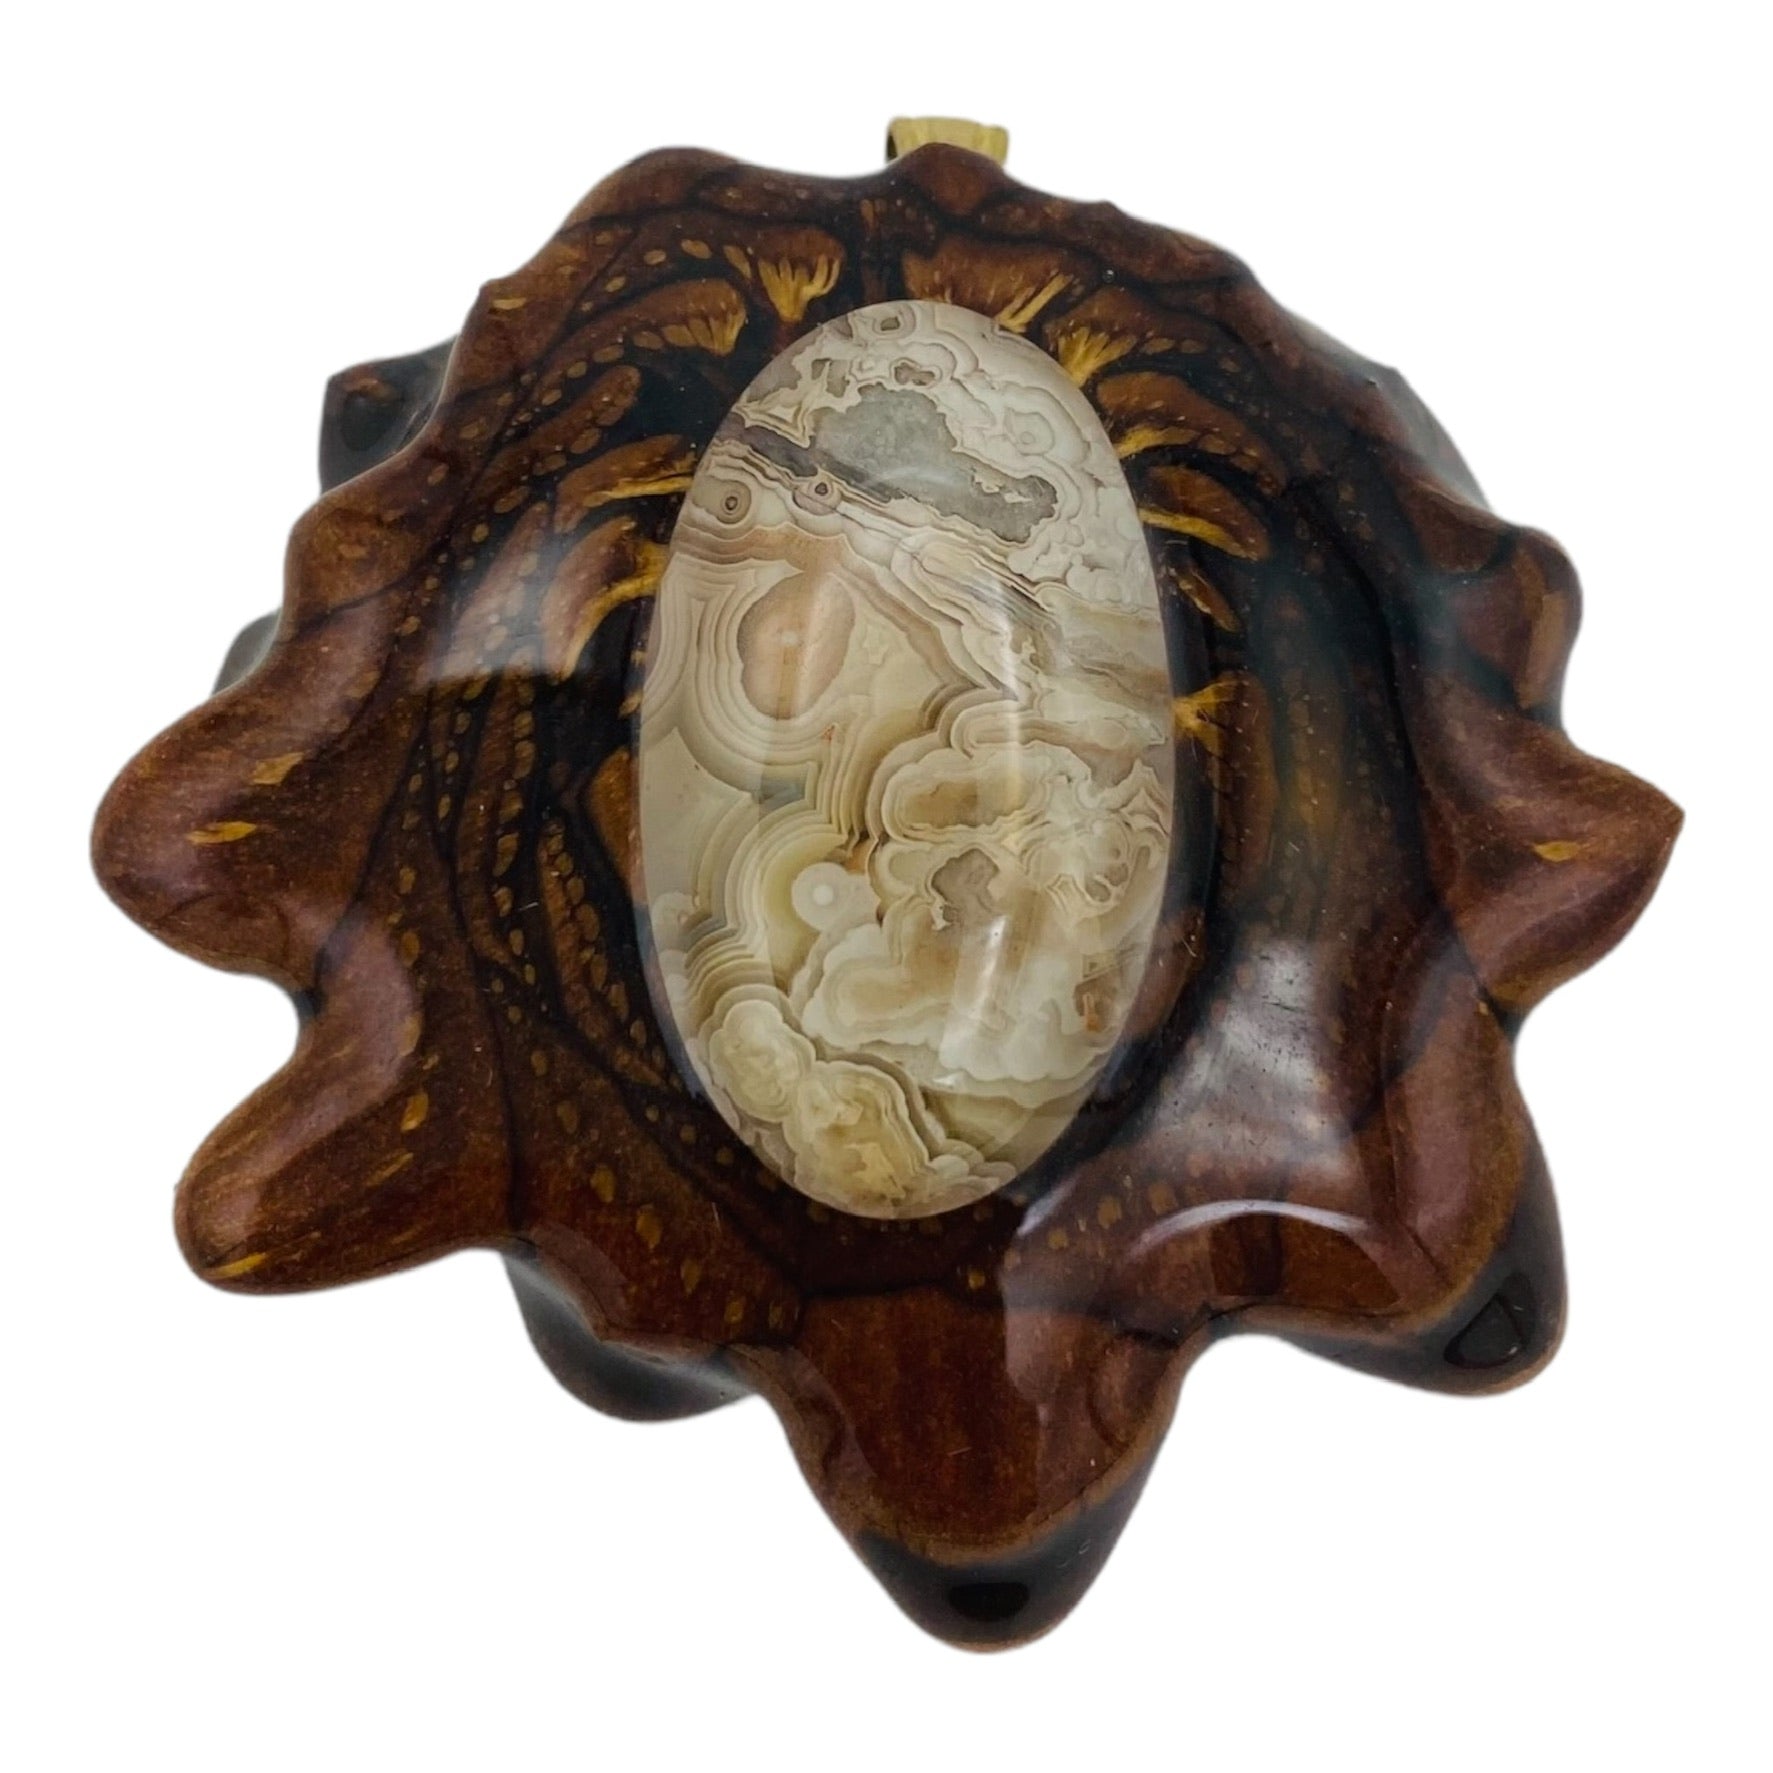 Third Eye Pinecones - Crazy Lace Agate - Large